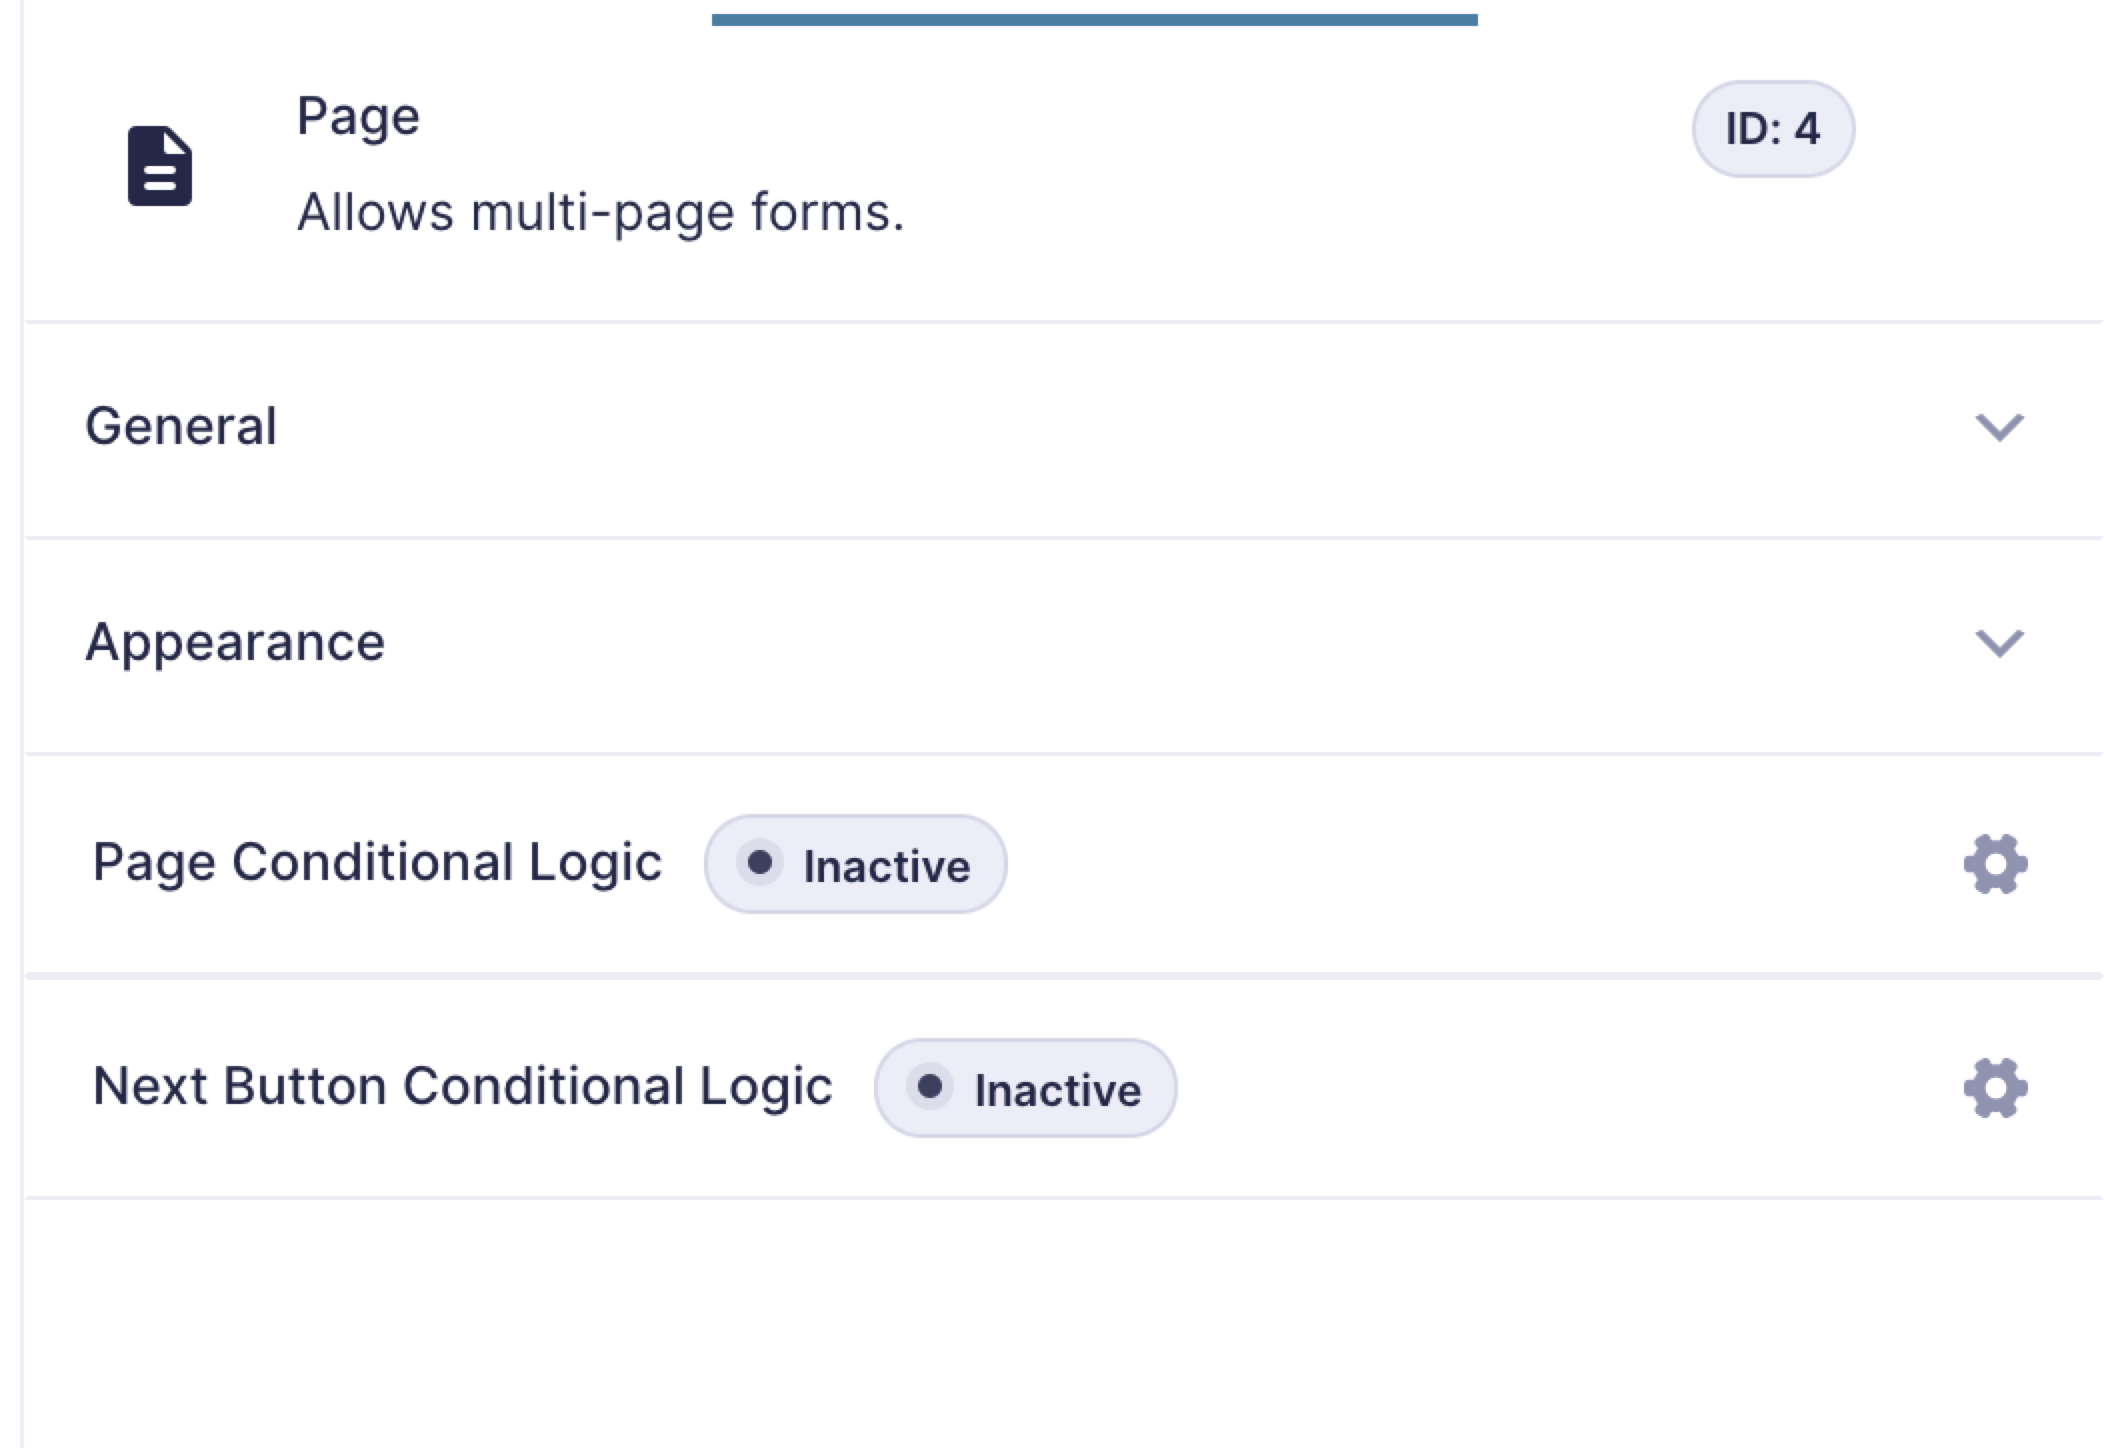 Page Conditional Logic